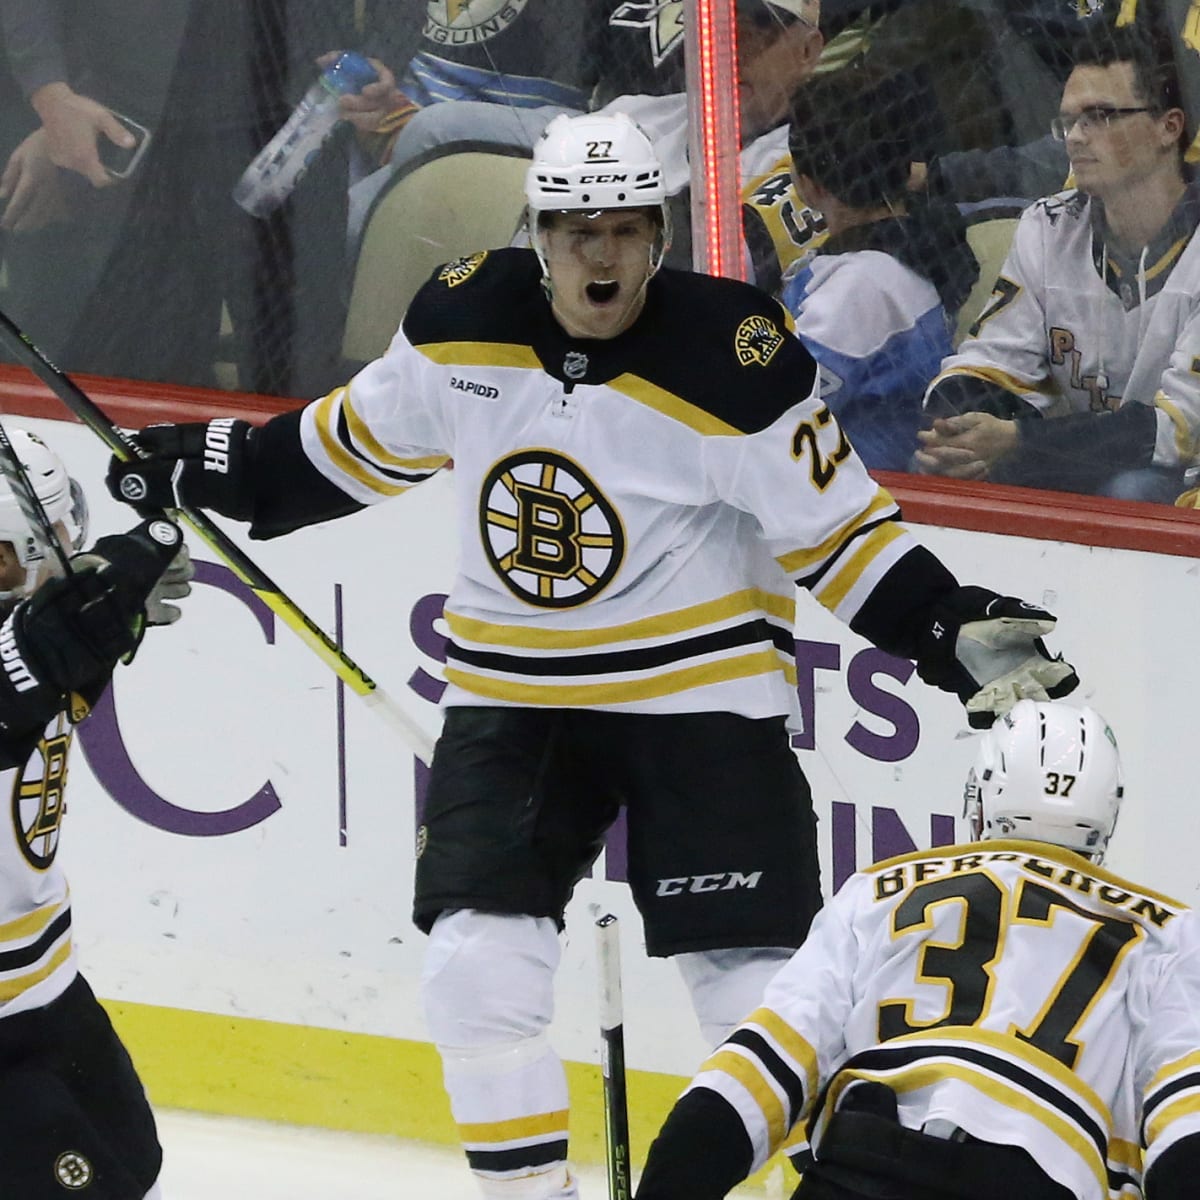 Rask gets 8-year, $56-million deal from Bruins